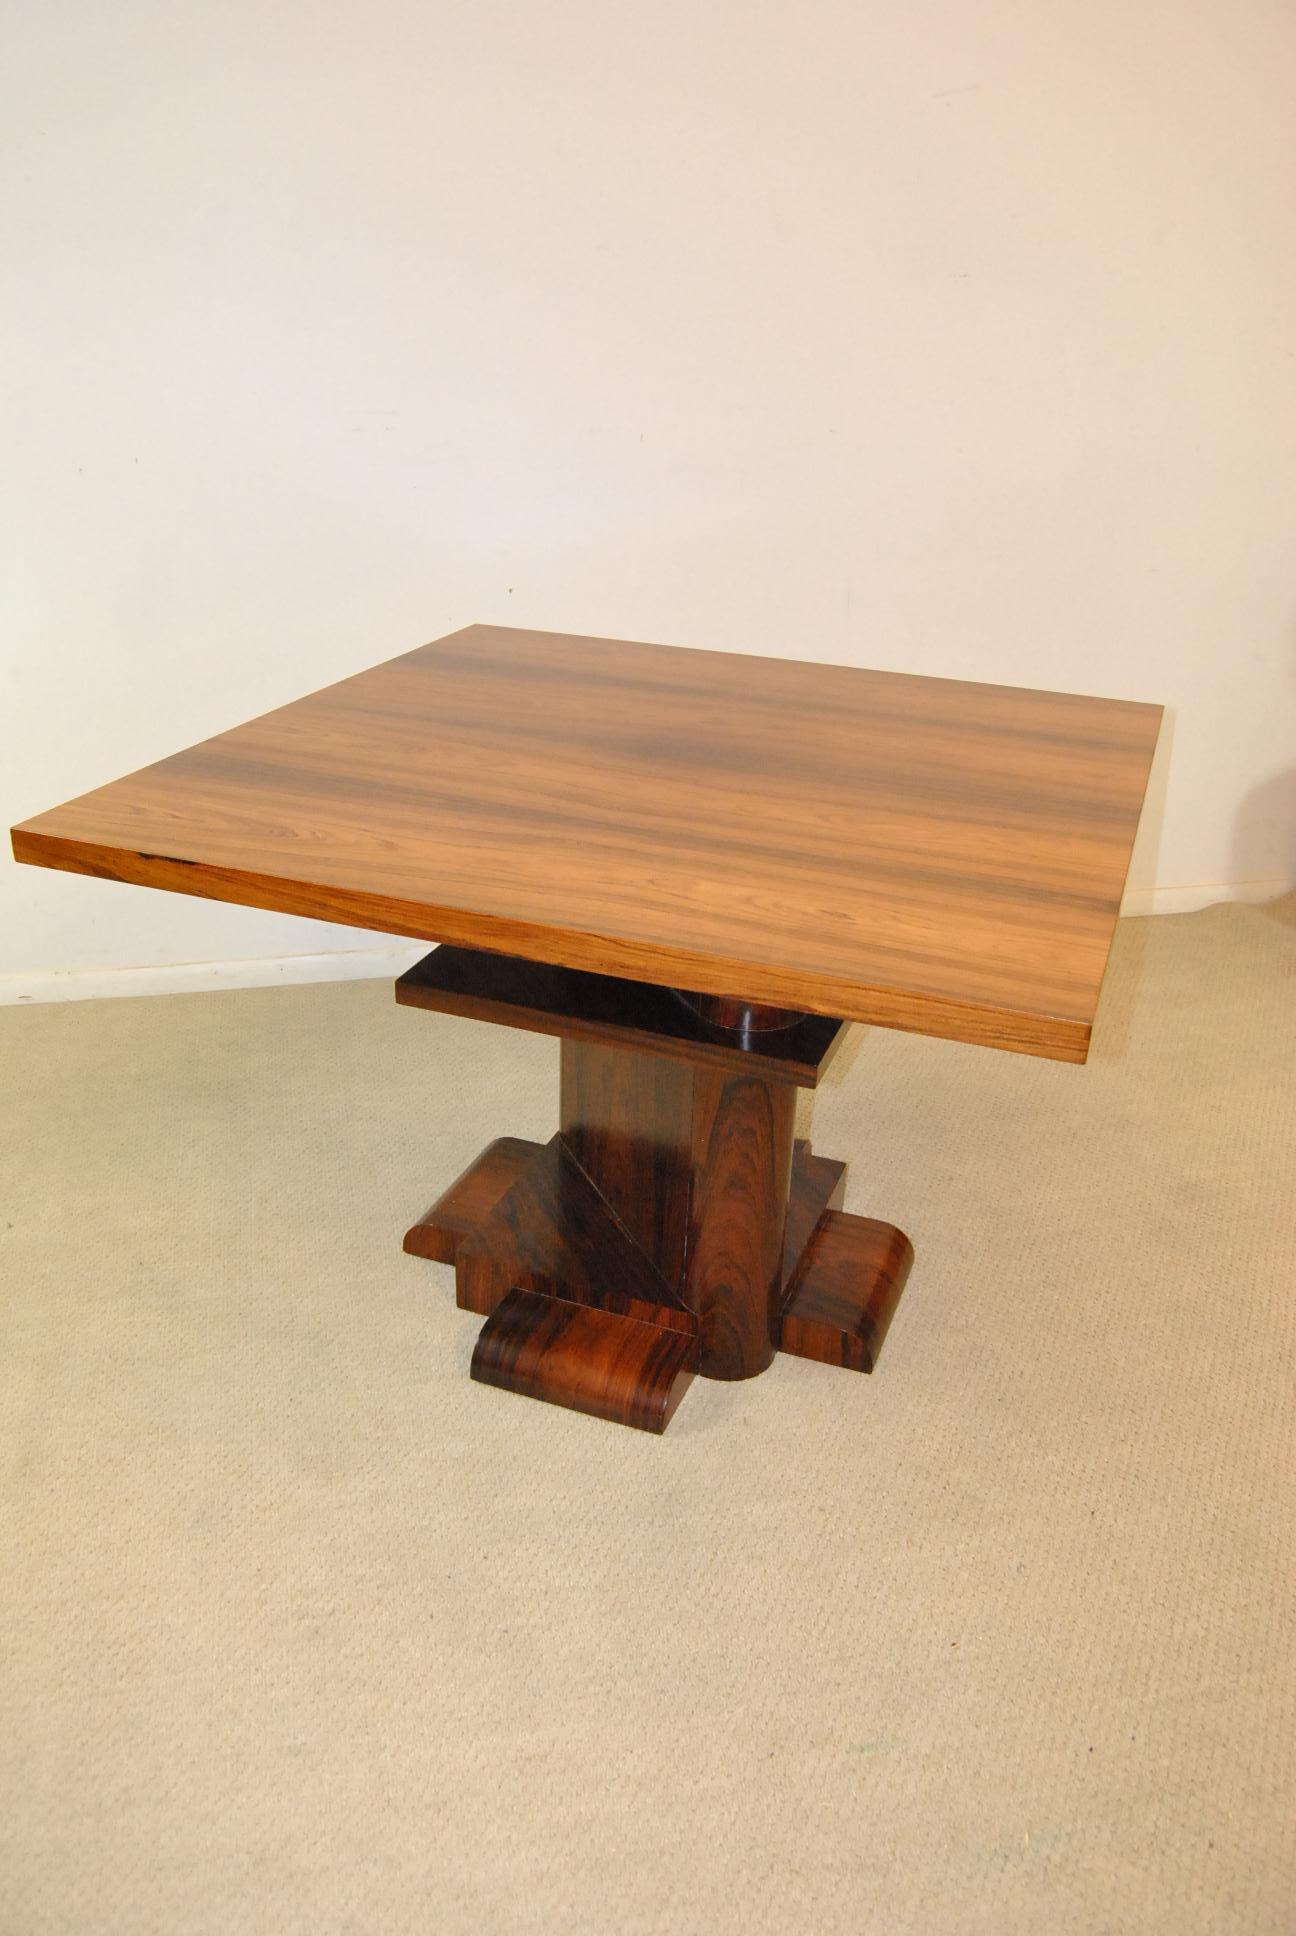 This exquisite rosewood centre table/ dining table/library table designed by Larry Lazlo for Bexley Heath for Widdicomb was in a very limited edition of only 100 tables ever done. It is modern with exquisite rare rosewood.. The two metal tags are on